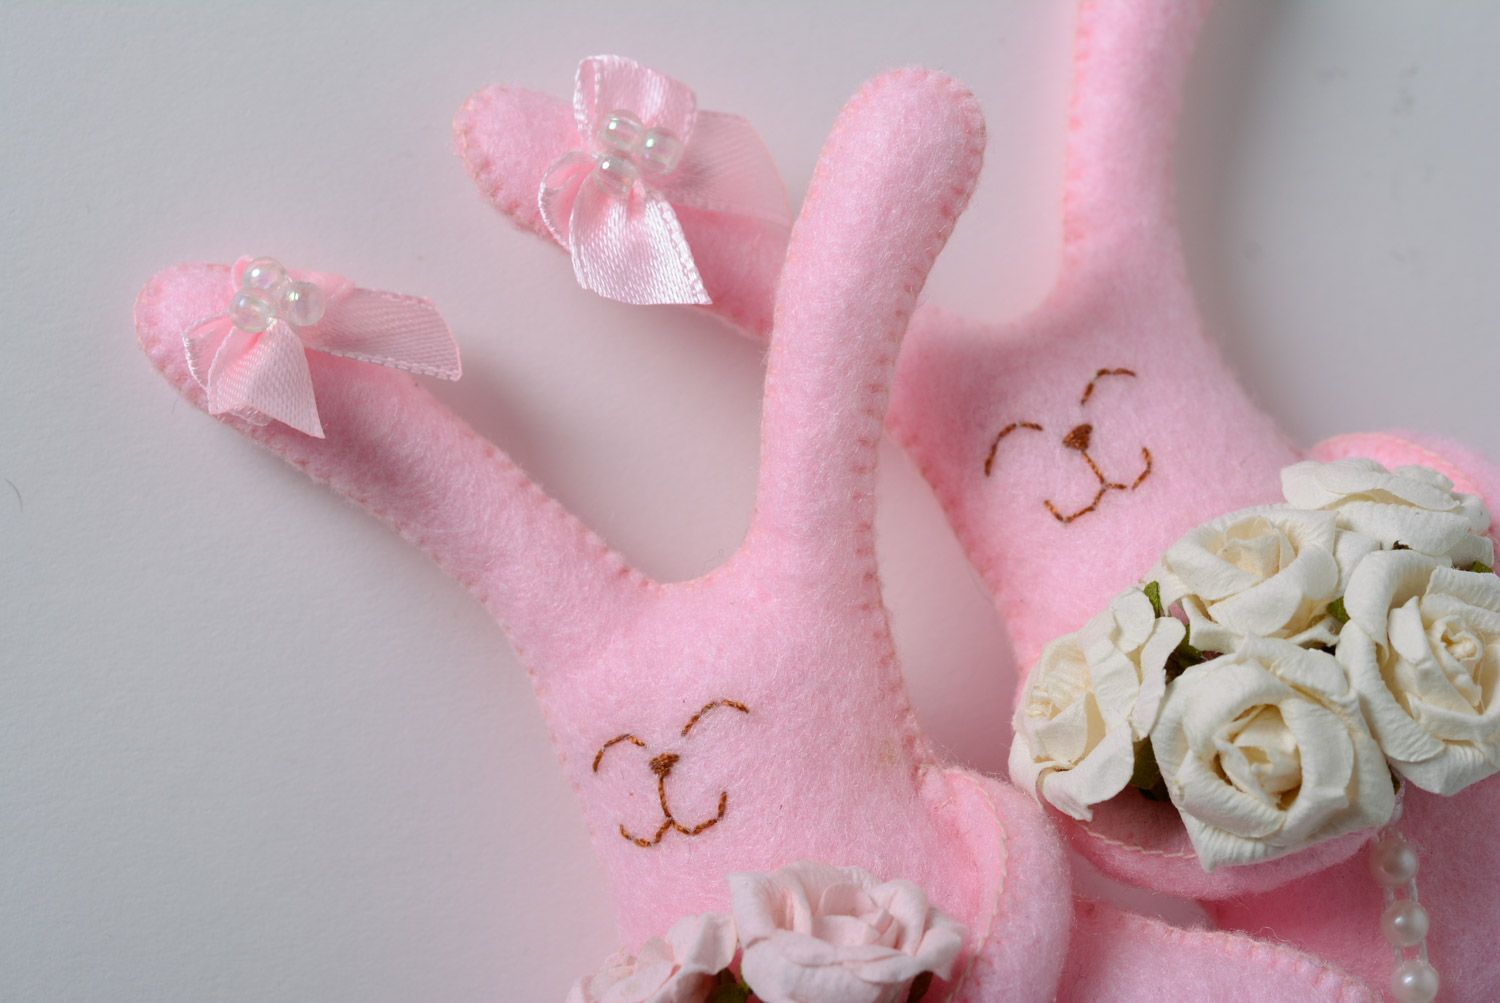 Handmade designer small soft toy bunnies in pink colors set of 2 pieces gift for baby photo 2